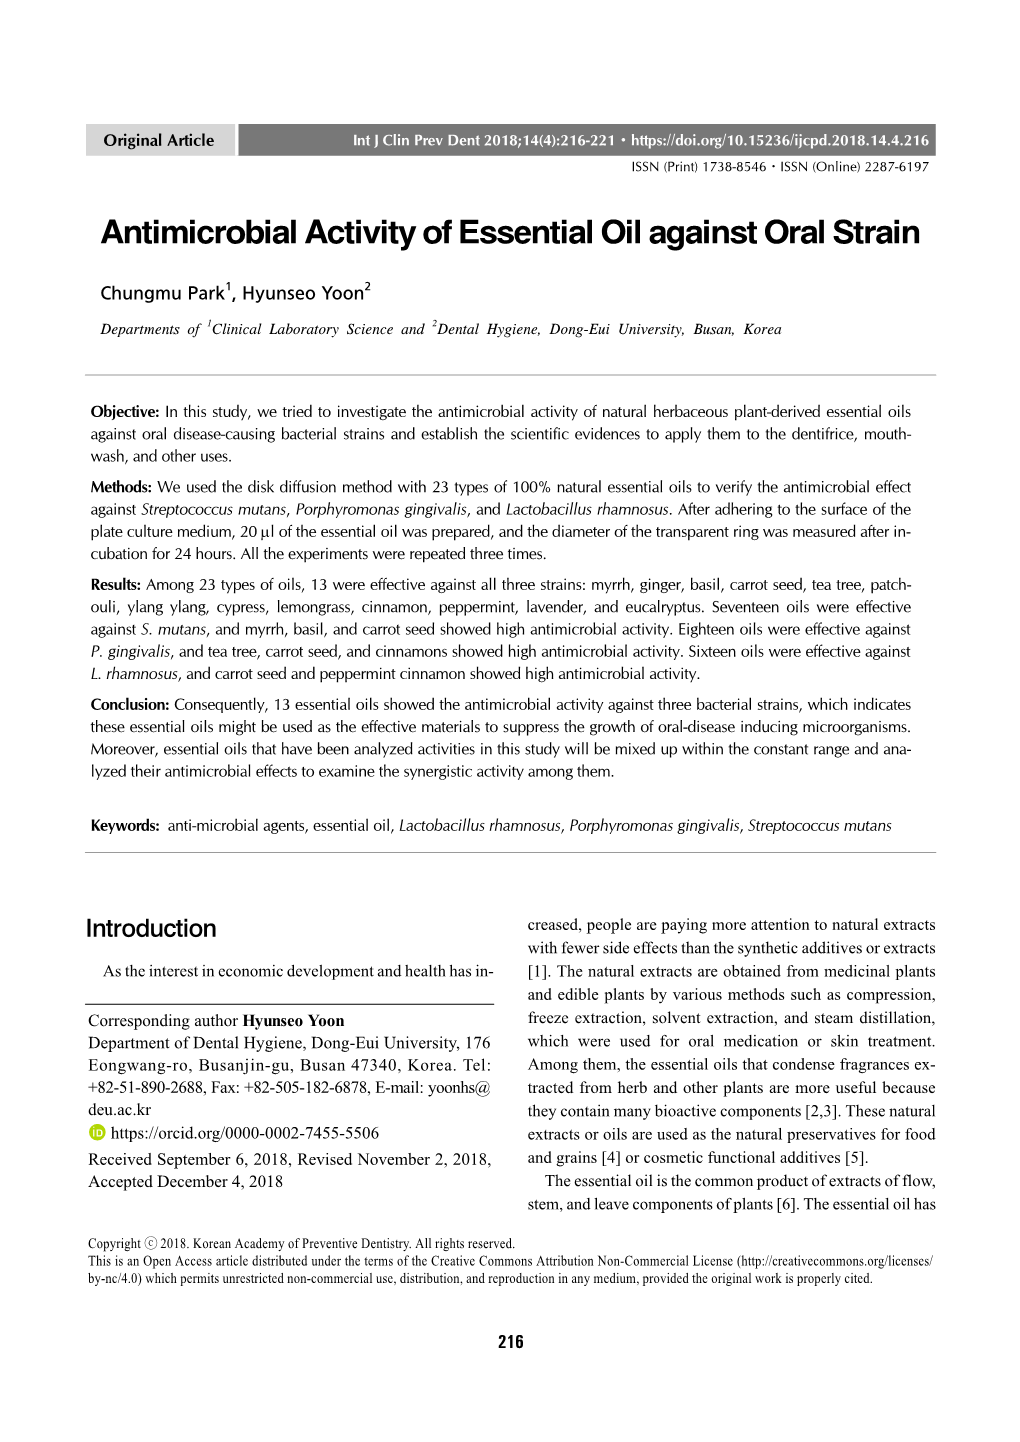 Antimicrobial Activity of Essential Oil Against Oral Strain